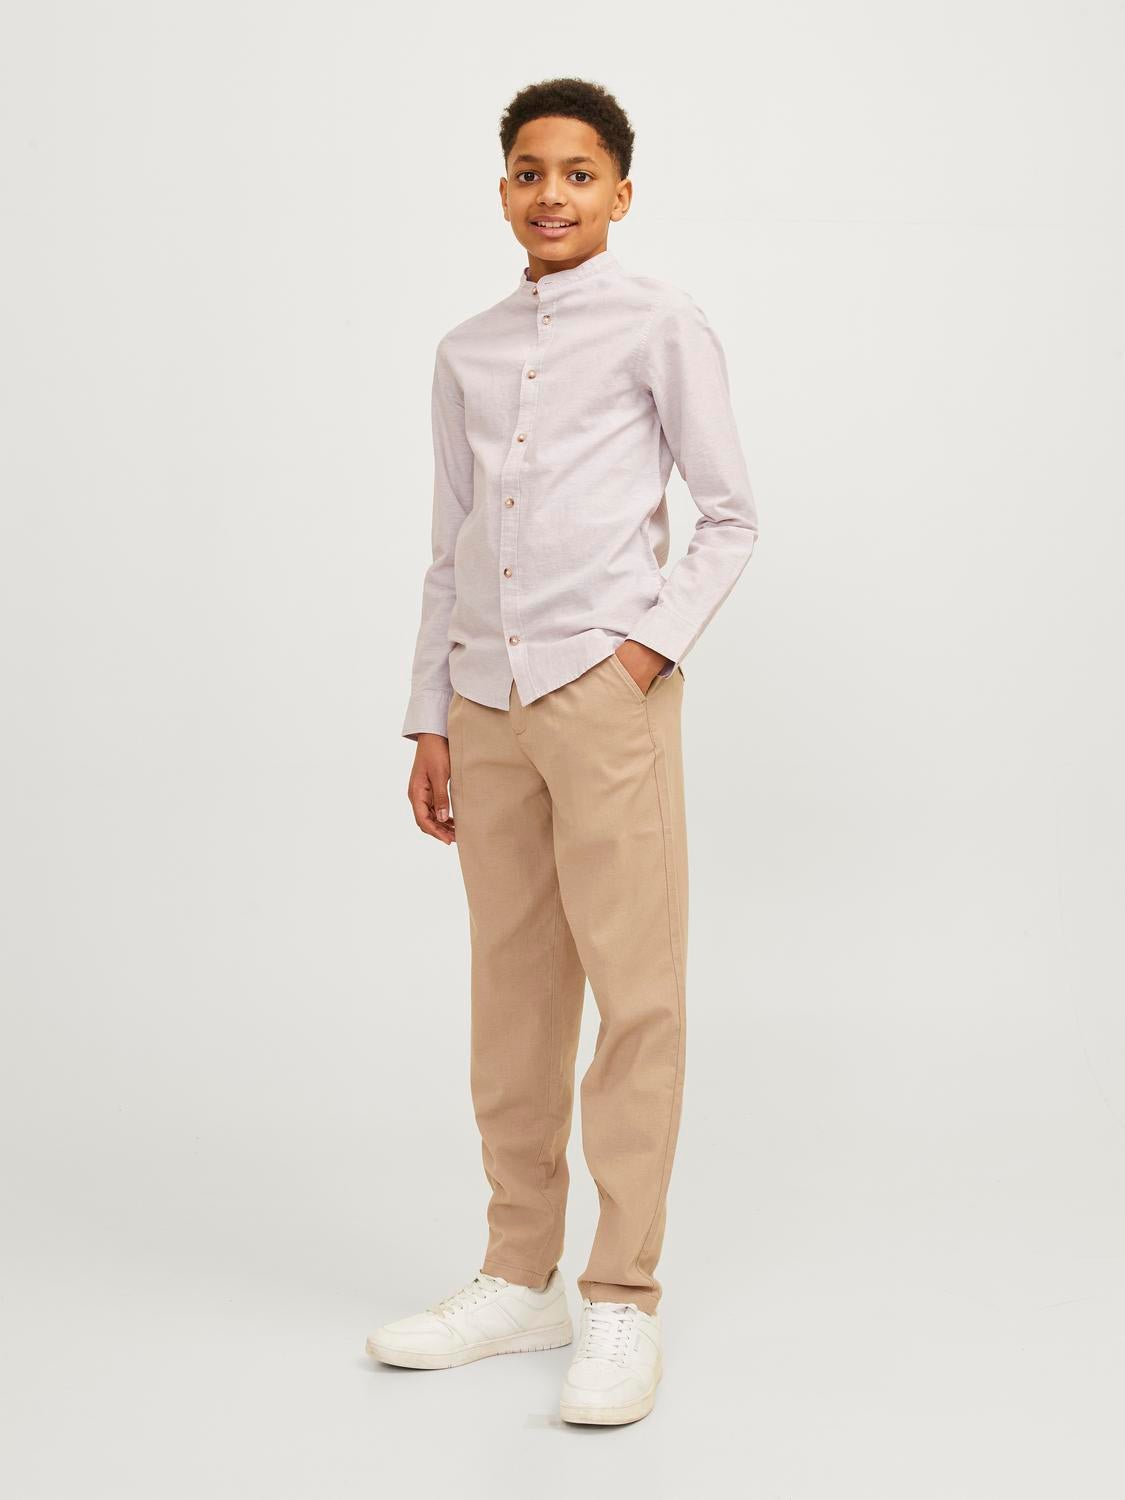 Casual shirt For boys